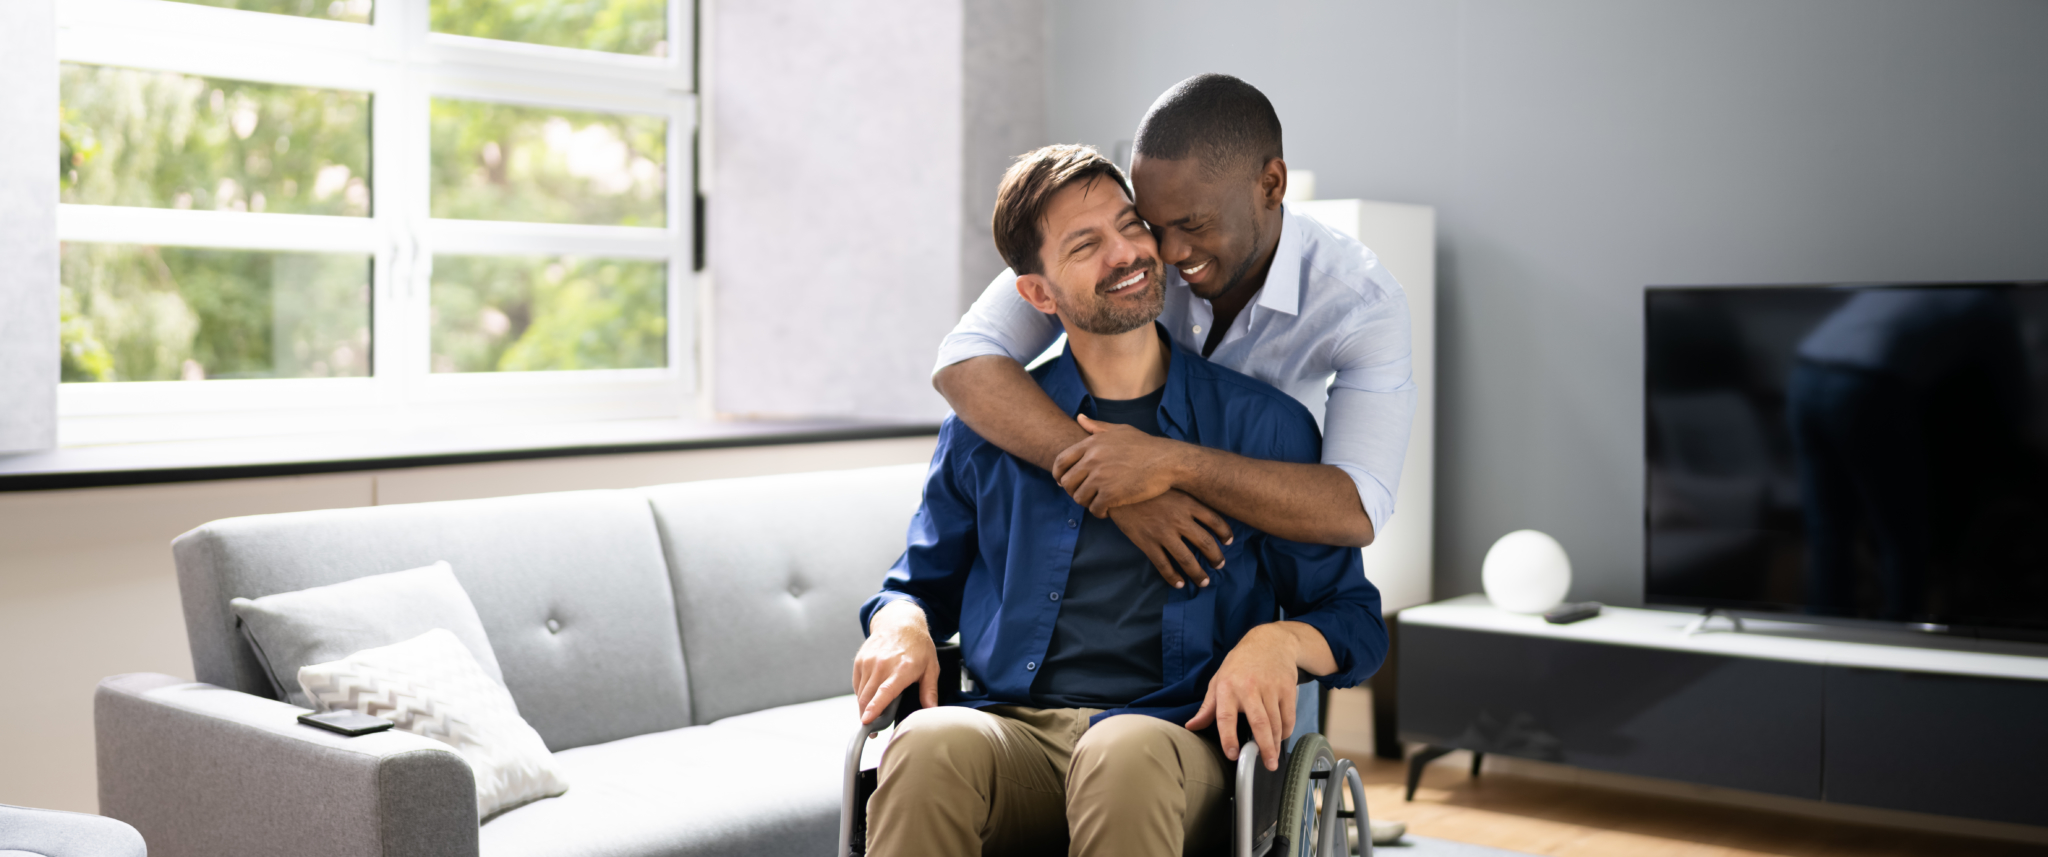 Loving gay couple embrace. One man sits in a wheel chair while his partner gives him a hug. Both are smiling